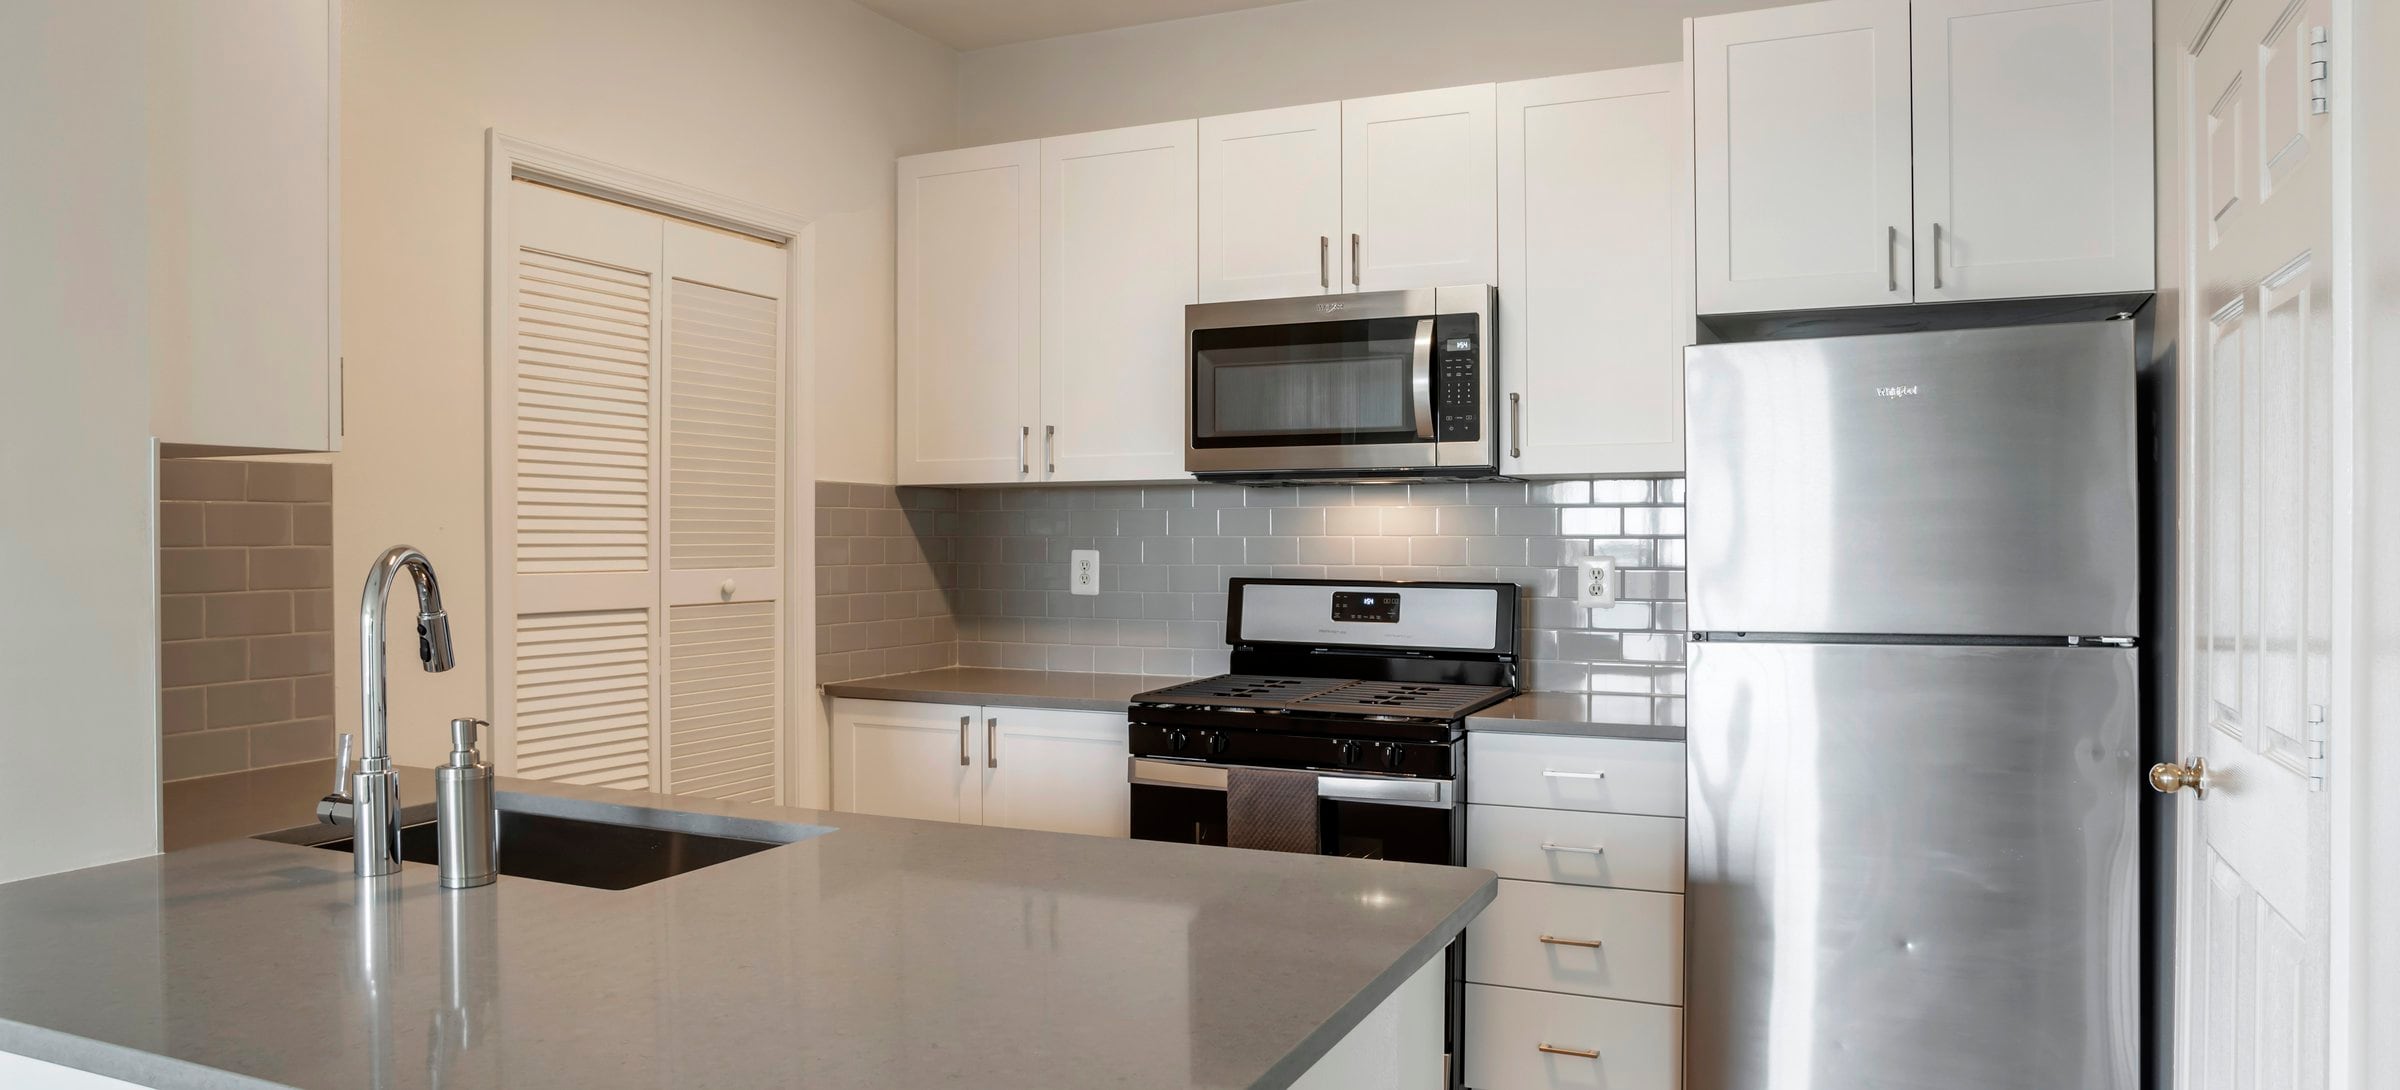 Finish Package II kitchen with white cabinetry, grey quartz countertops, stainless steel appliances and tile backsplash